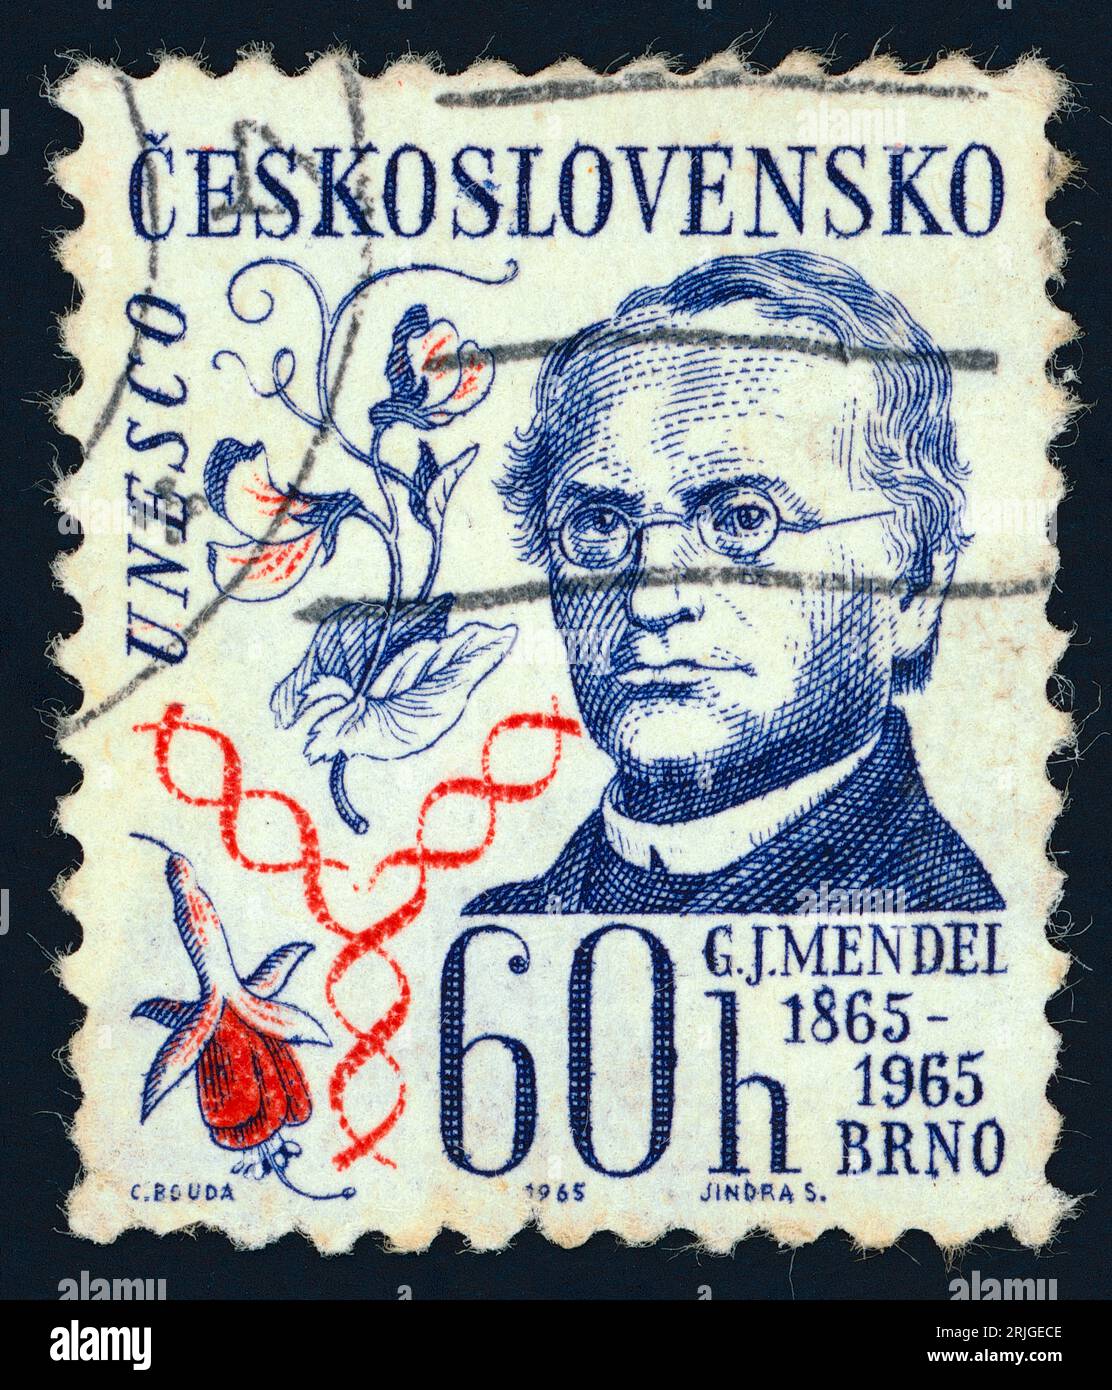 Gregor Johann Mendel (1822 – 1884). Postage stamp issued in Czechoslovakia in 19xx. Mendel was a botanist, teacher, and Augustinian prelate, the first person to lay the mathematical foundation of the science of genetics, in what came to be called Mendelism. Stock Photo